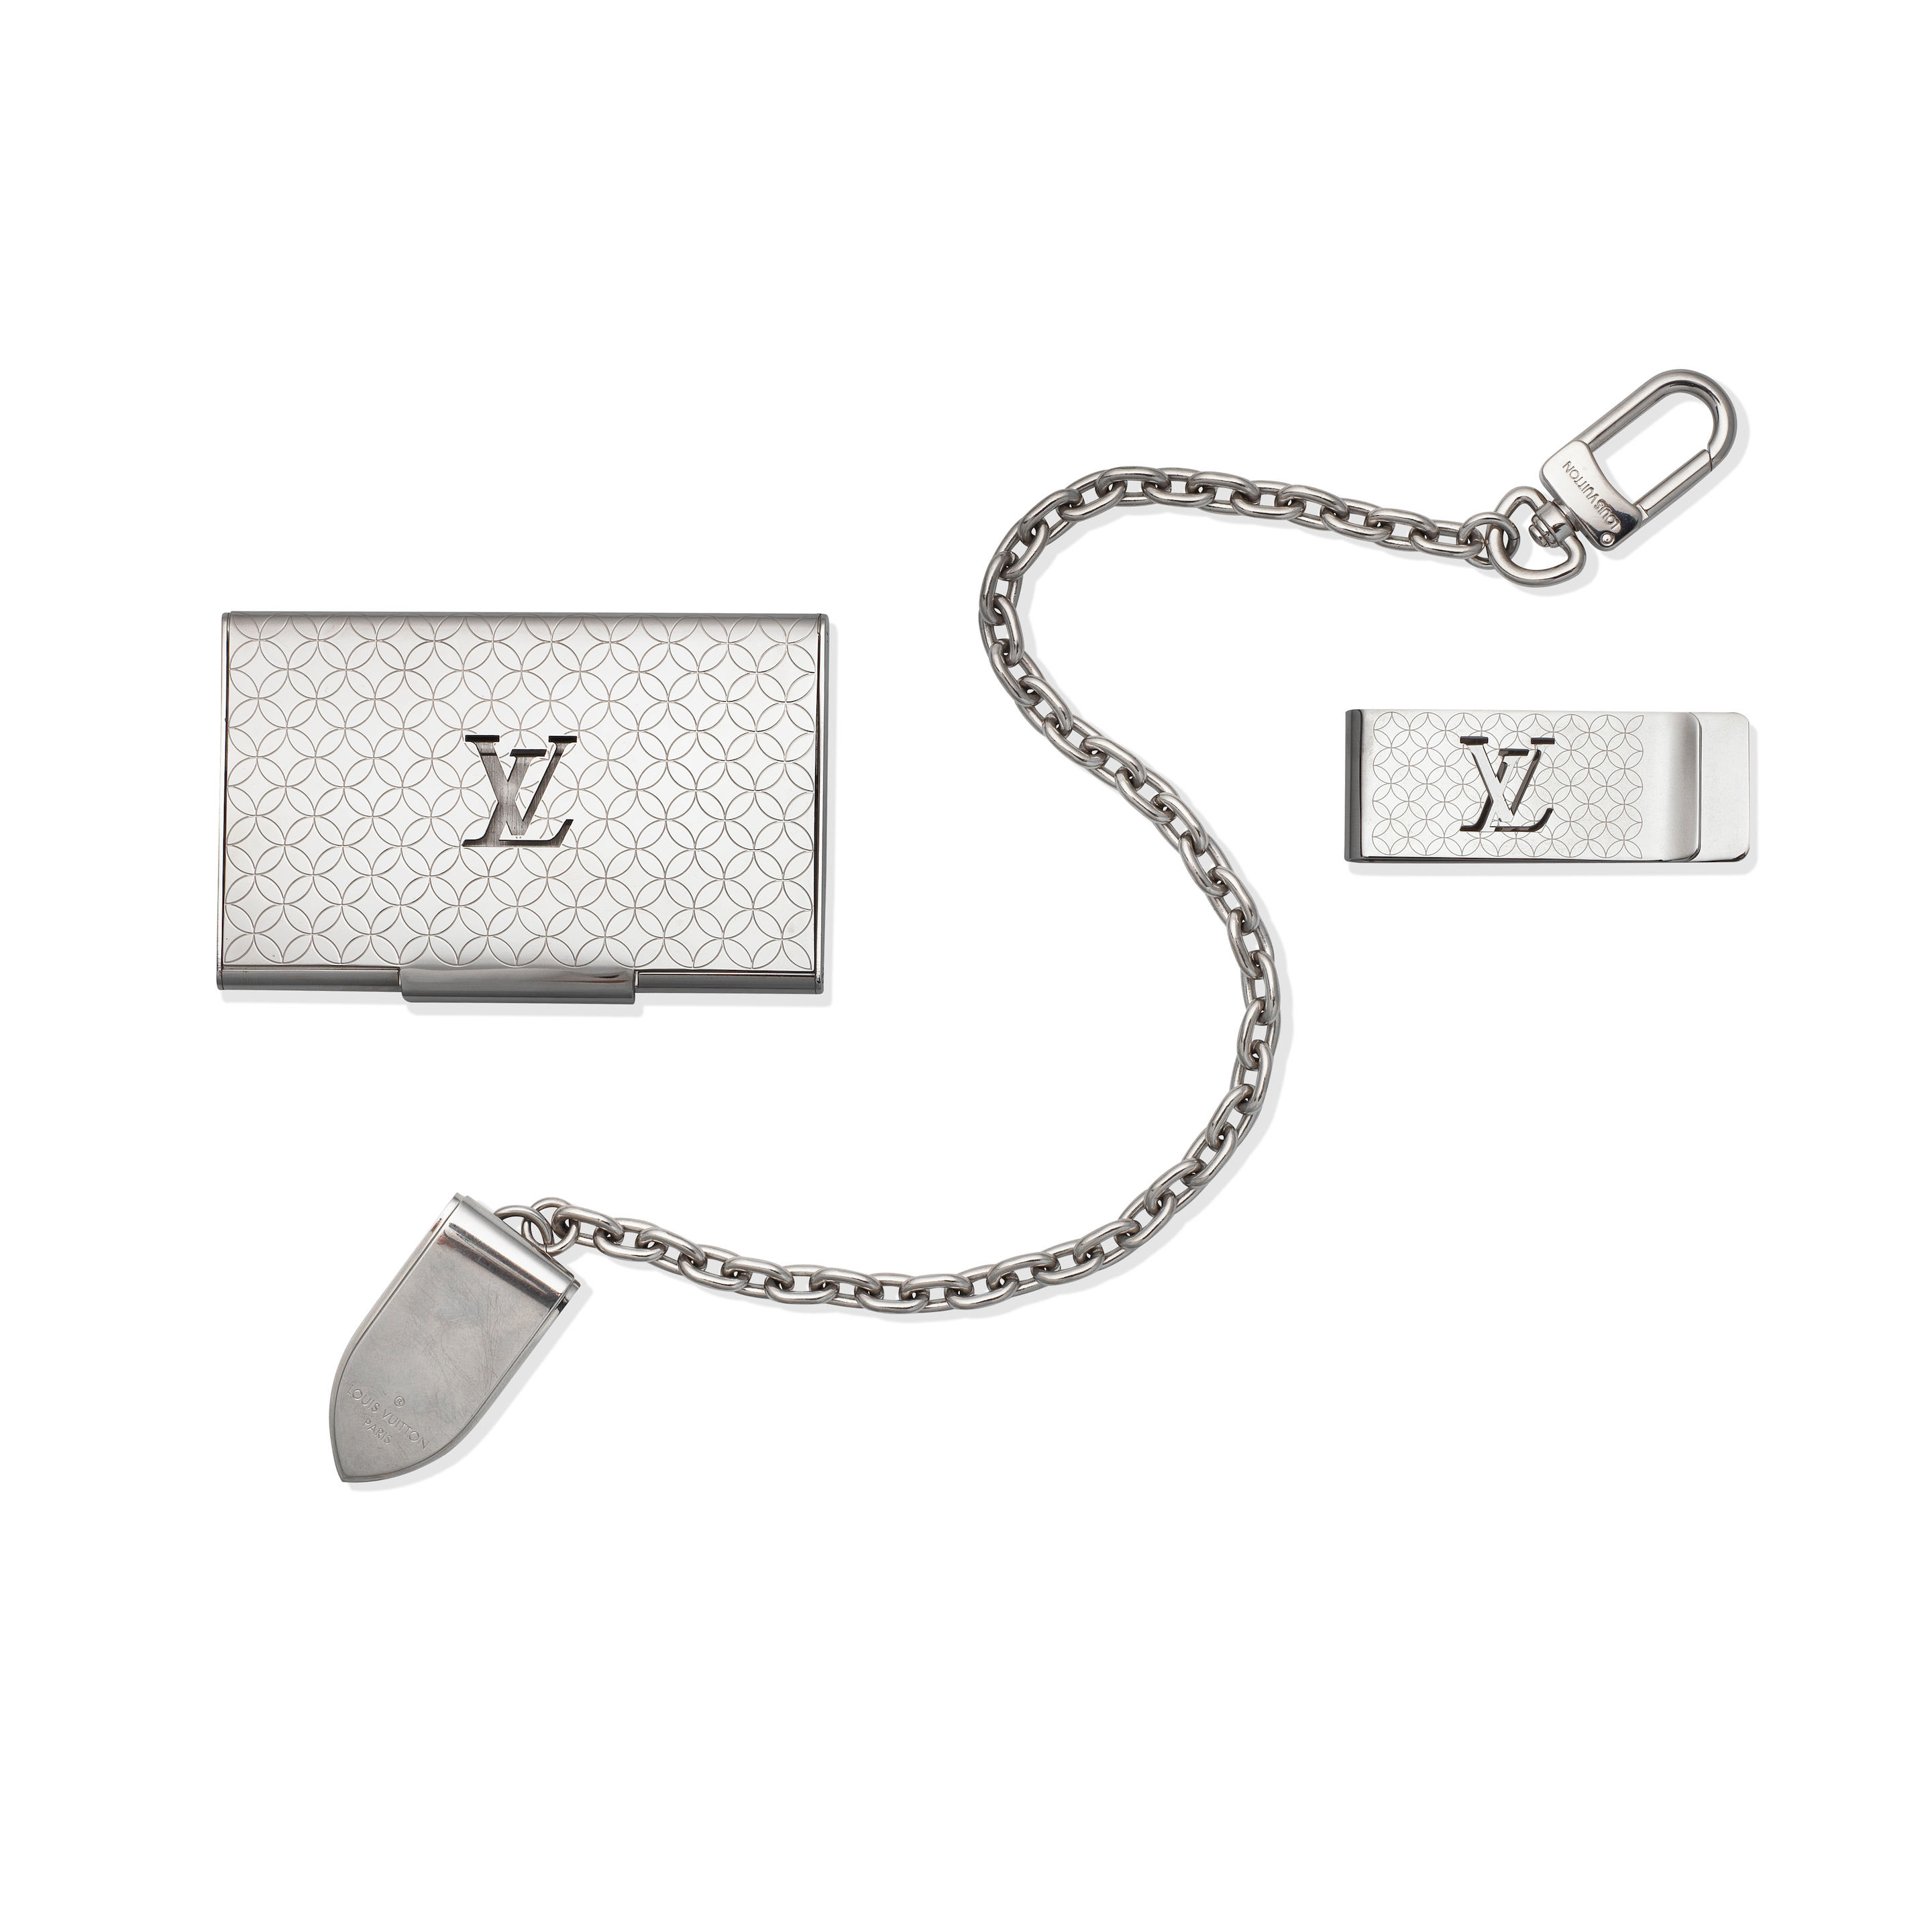 Bonhams : Two Bill Clips and one Card Holder, Louis Vuitton, c. 2012-2013,  (Includes dust bags and boxes)